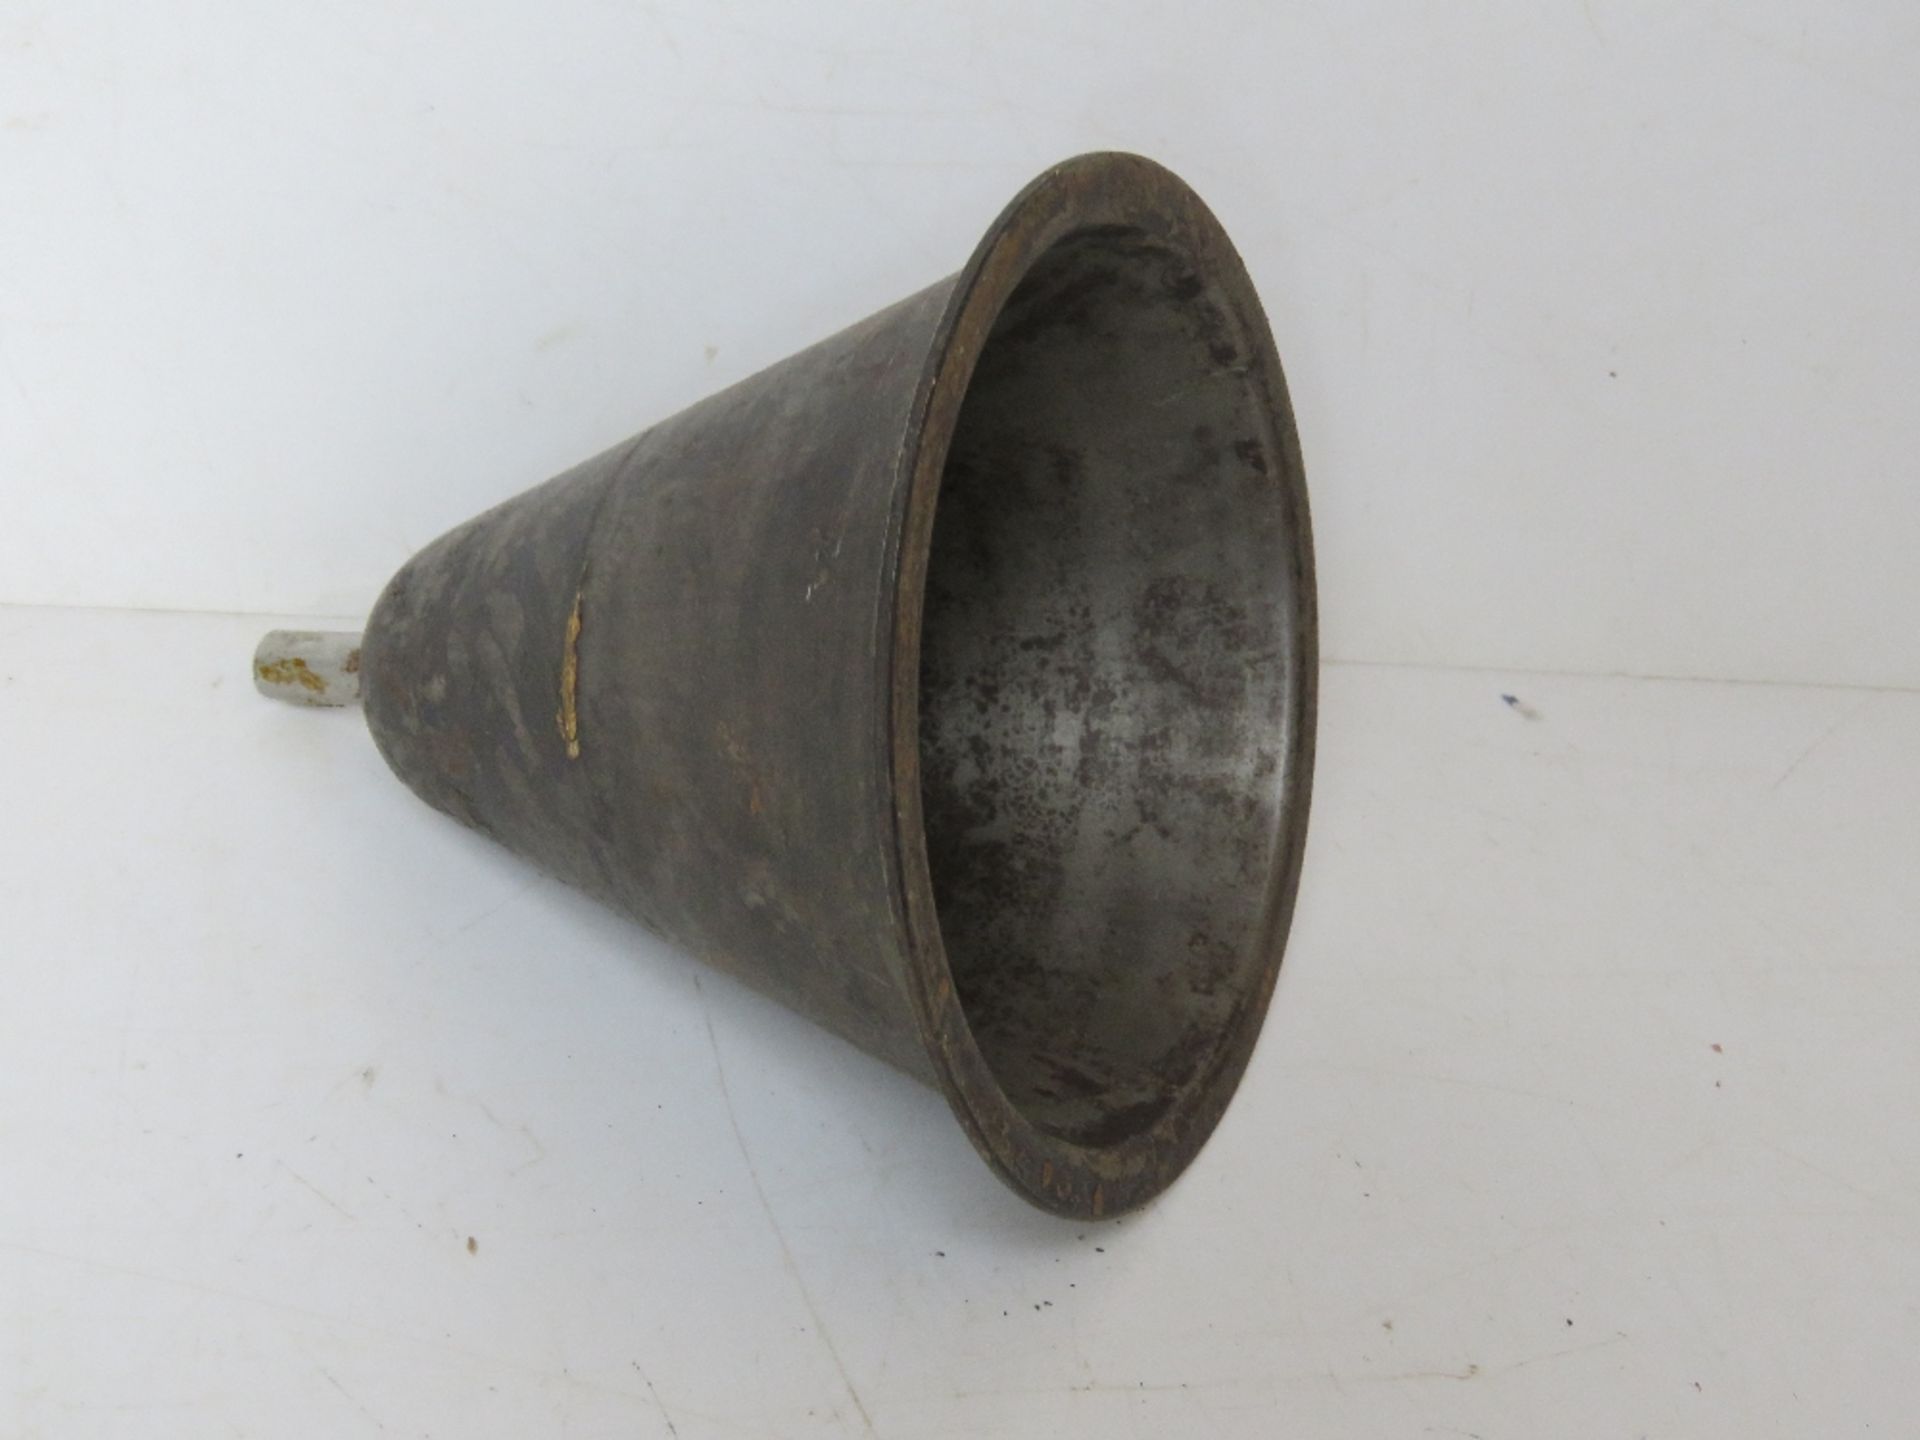 A WWII German Hollow Charge cone cup for the 3.7cm Pak Stielgranaten.